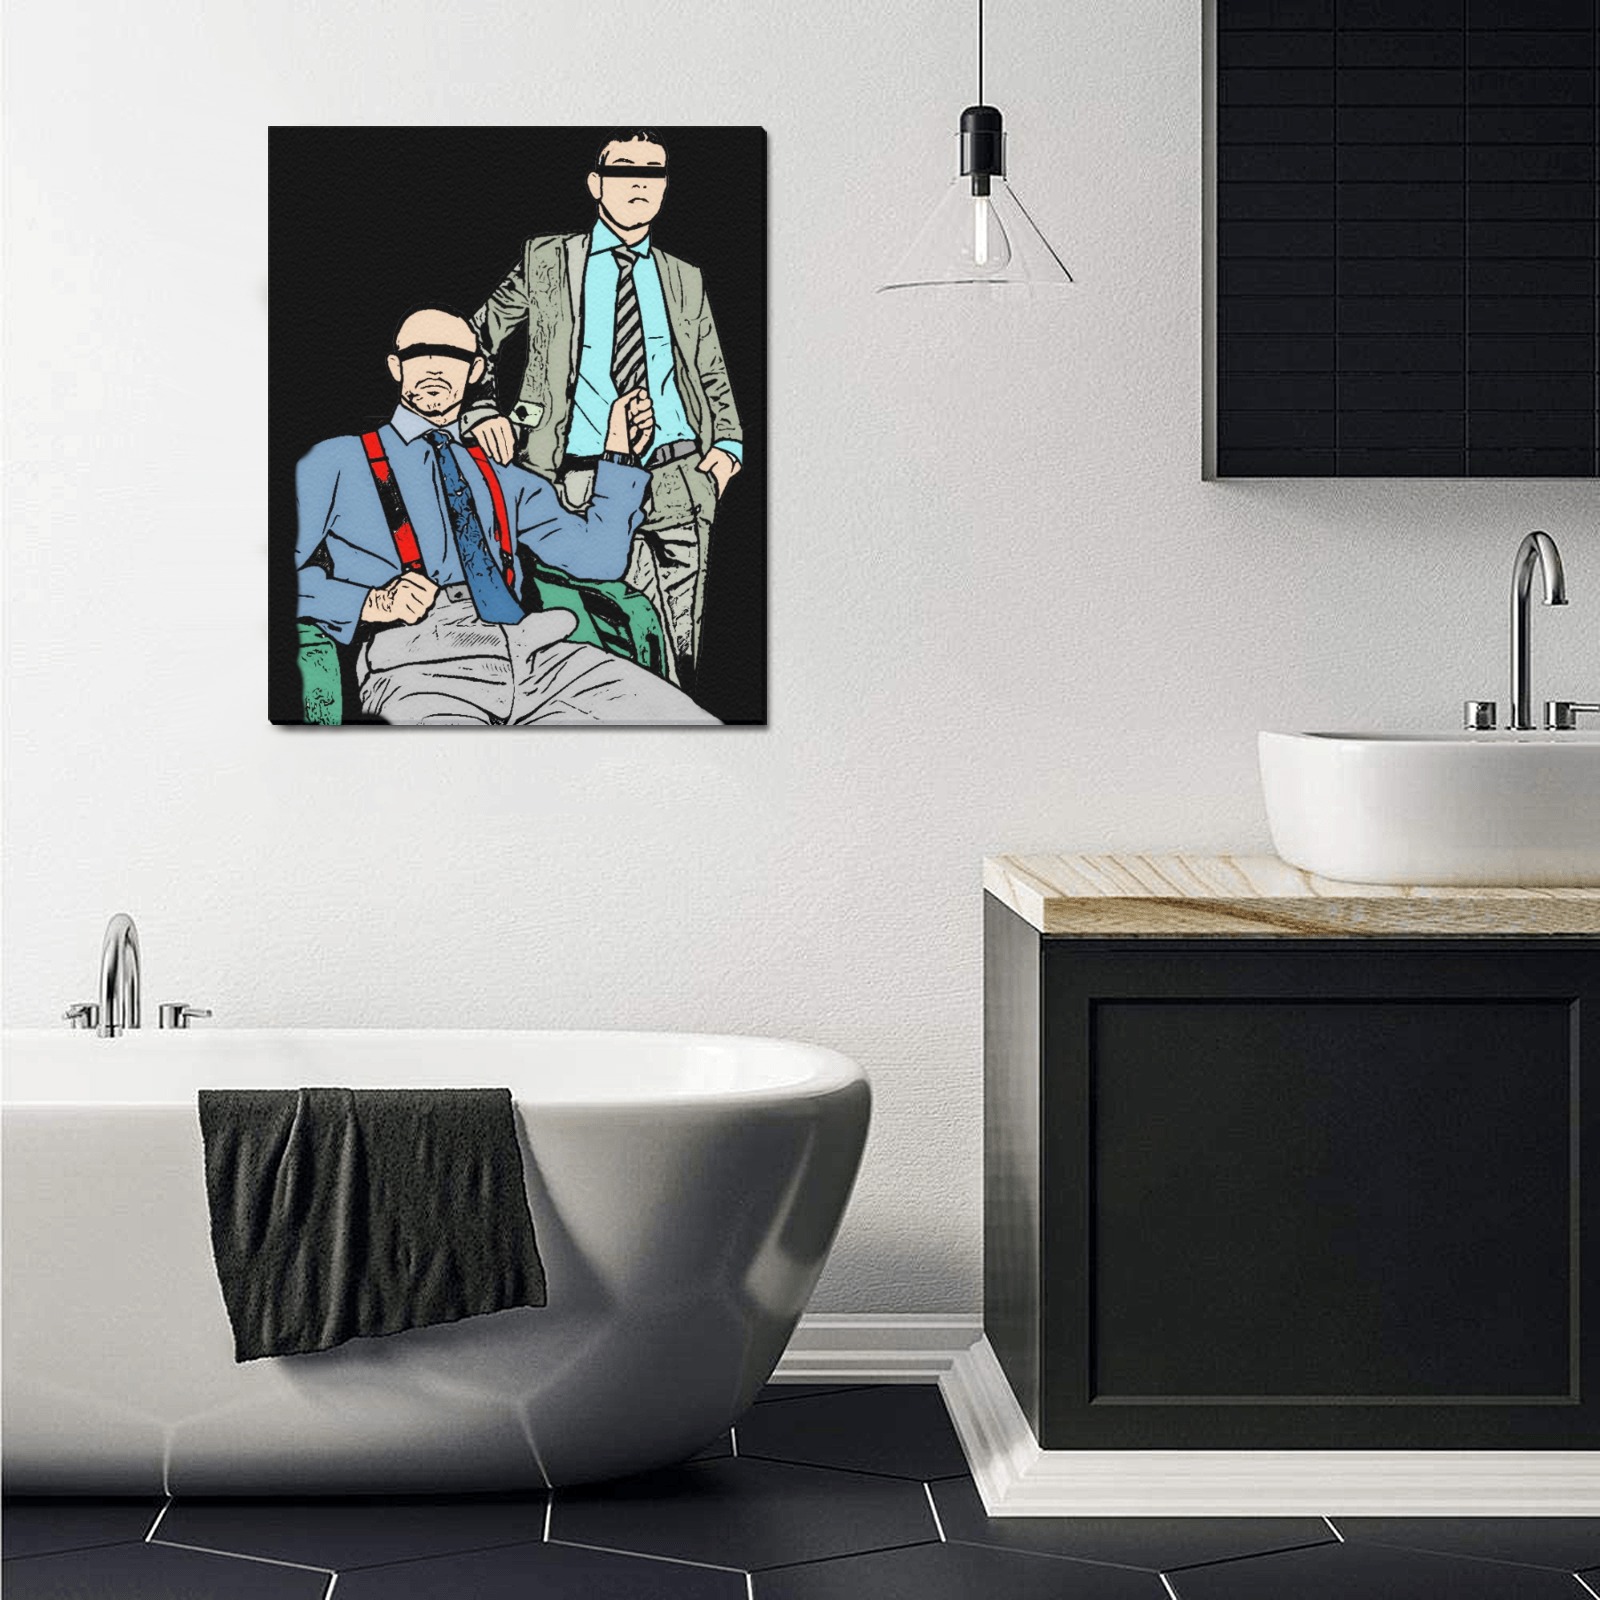 Suit and Tie by Fetishworld Frame Canvas Print 20"x24"